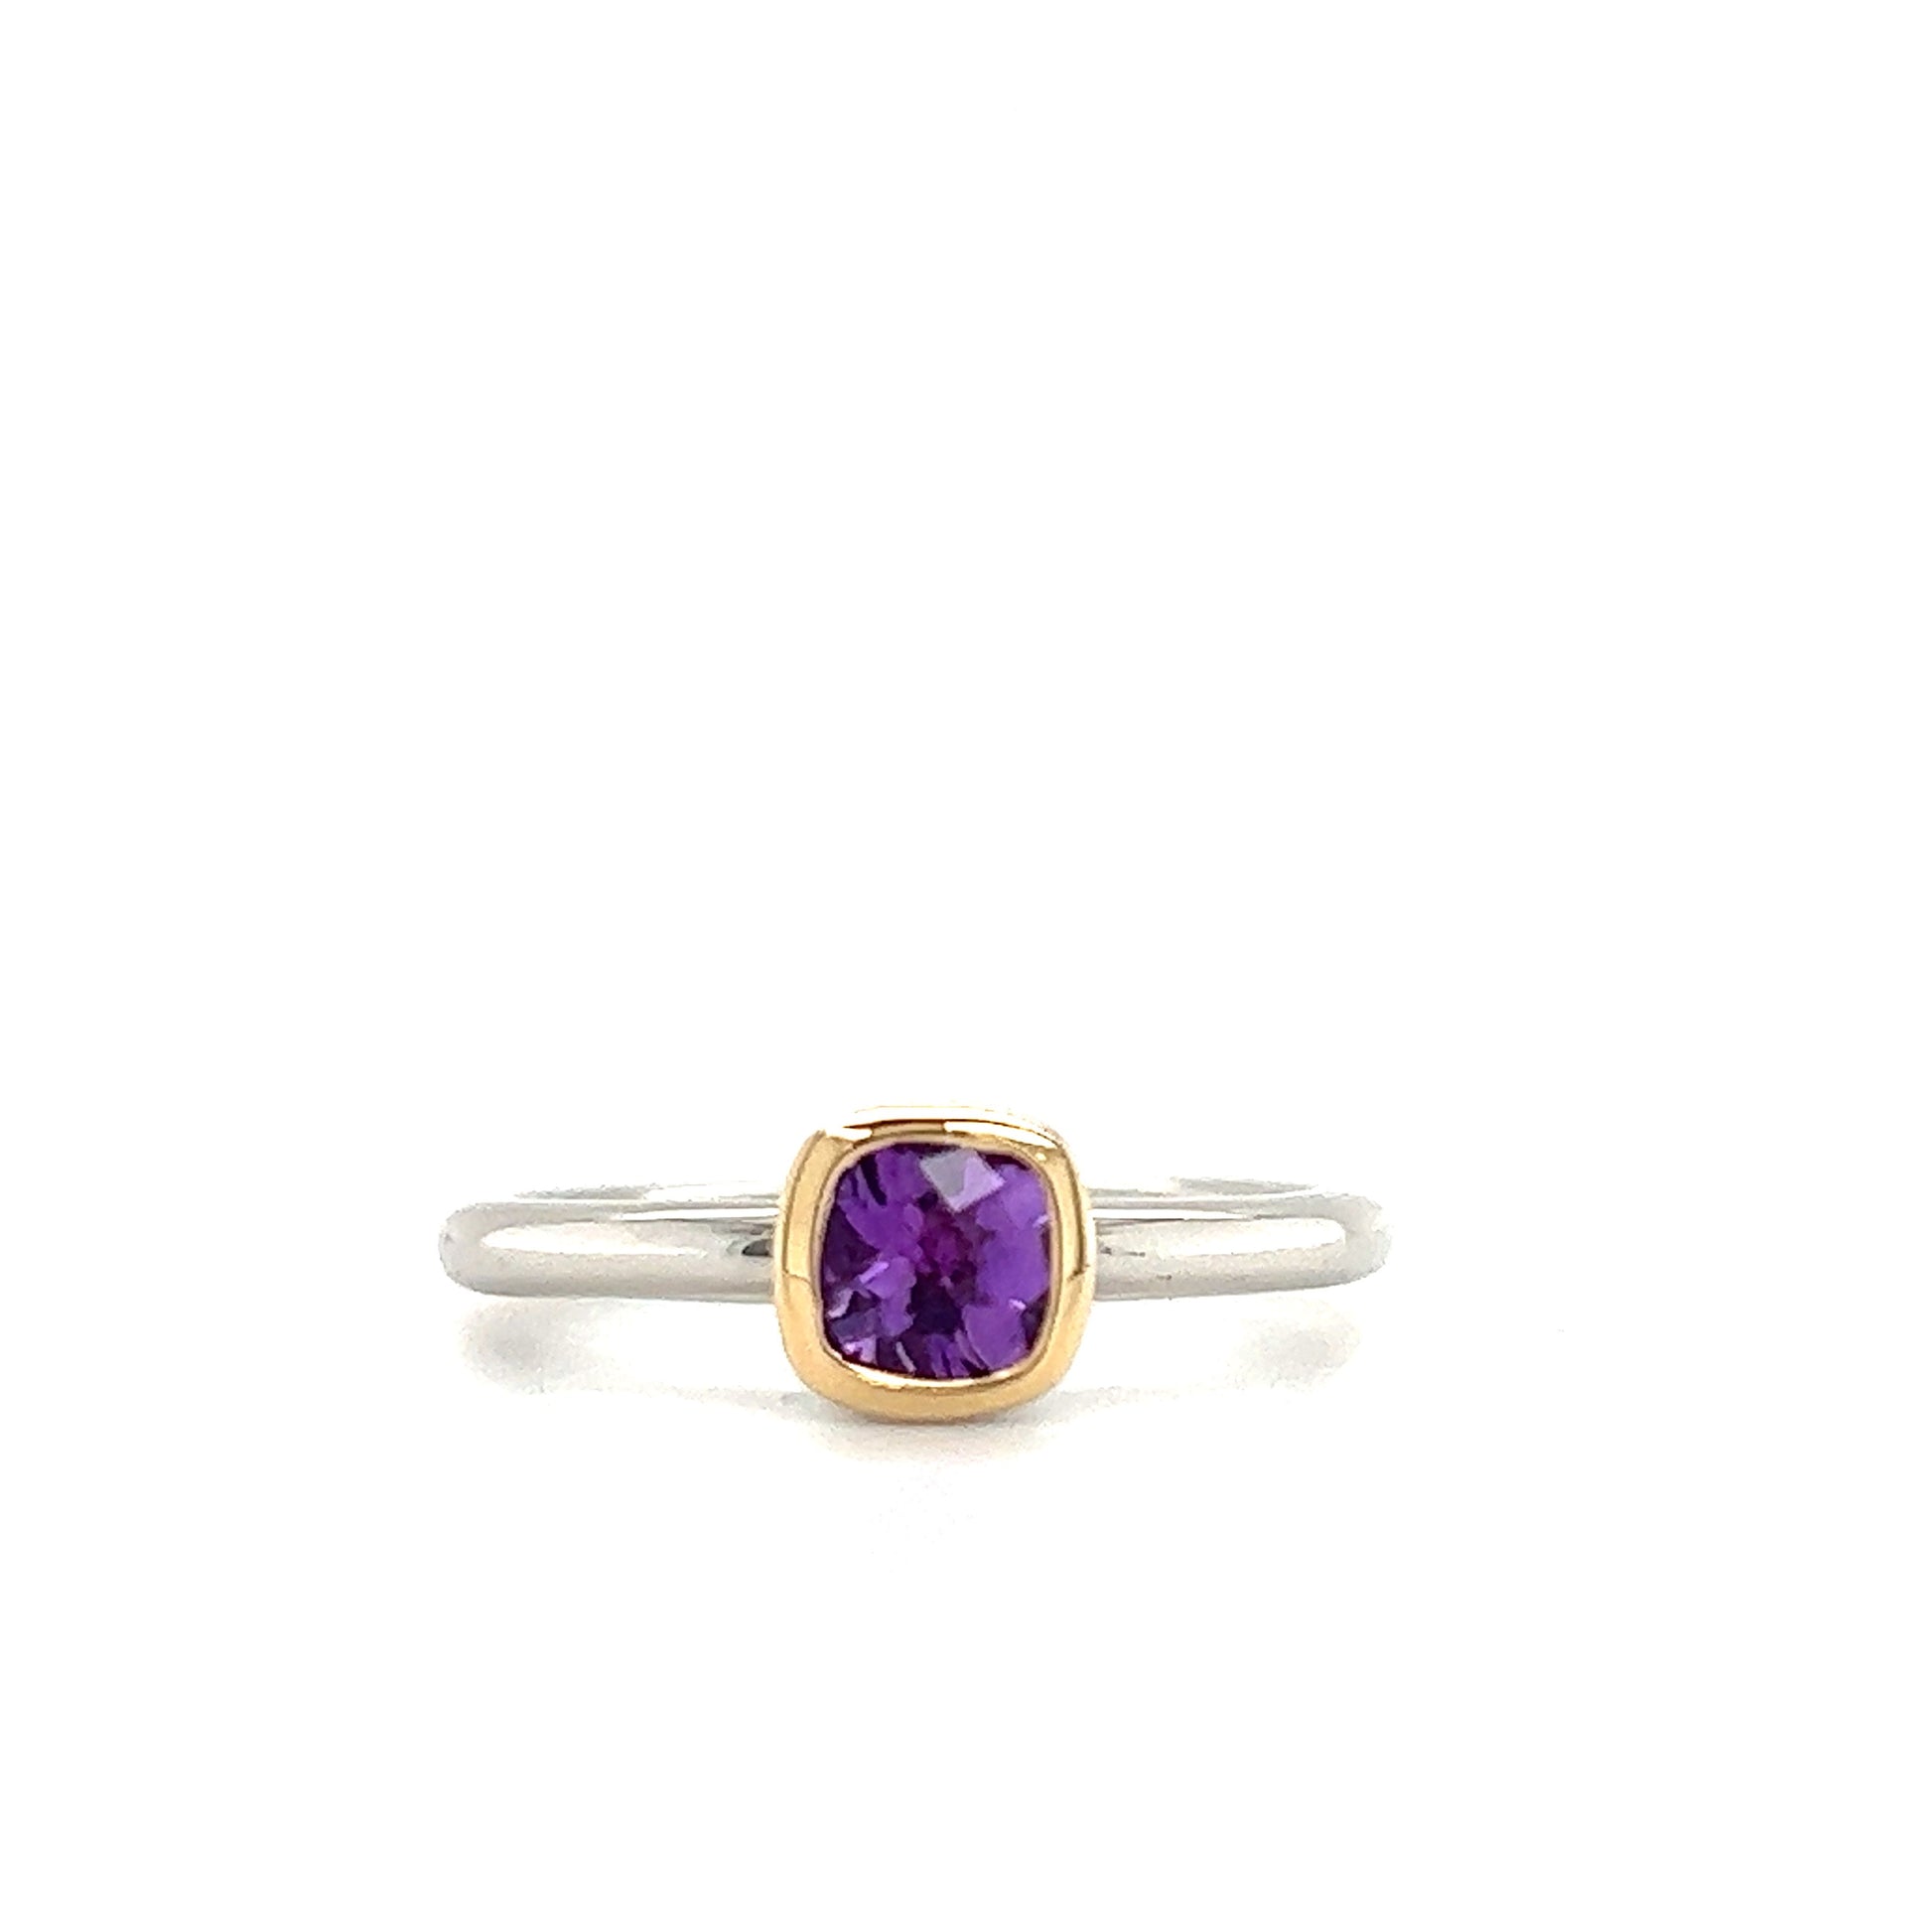 Cushion Amethyst Ring in Sterling Silver with 14K Yellow Gold Accent Flat View